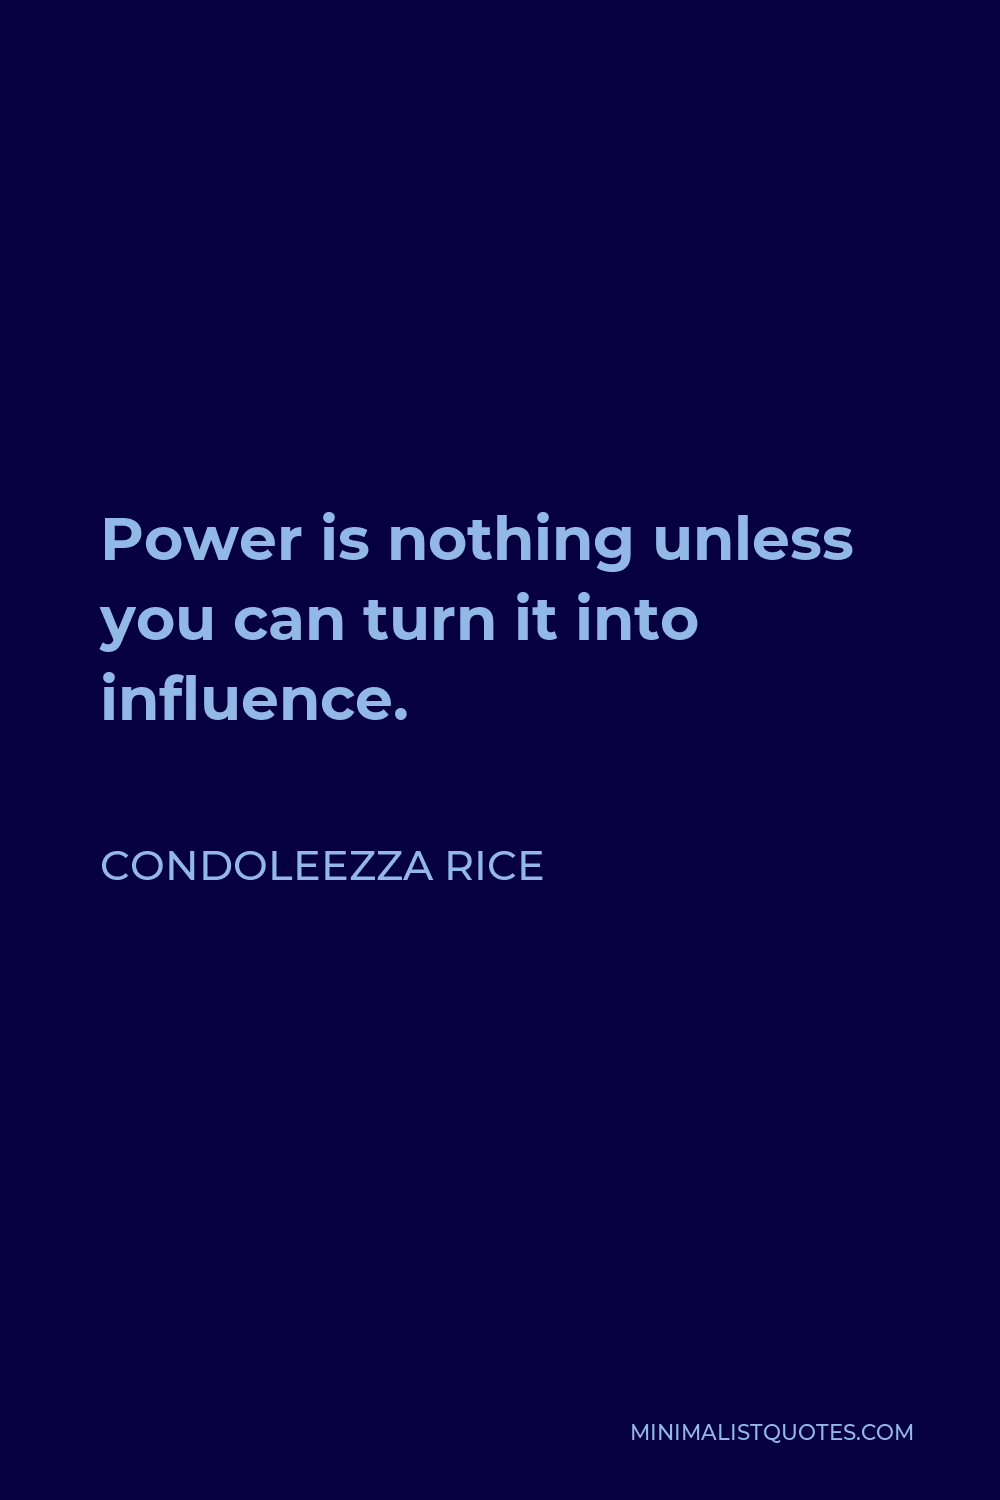 Condoleezza Rice Quote - Power is nothing unless you can turn it into influence.